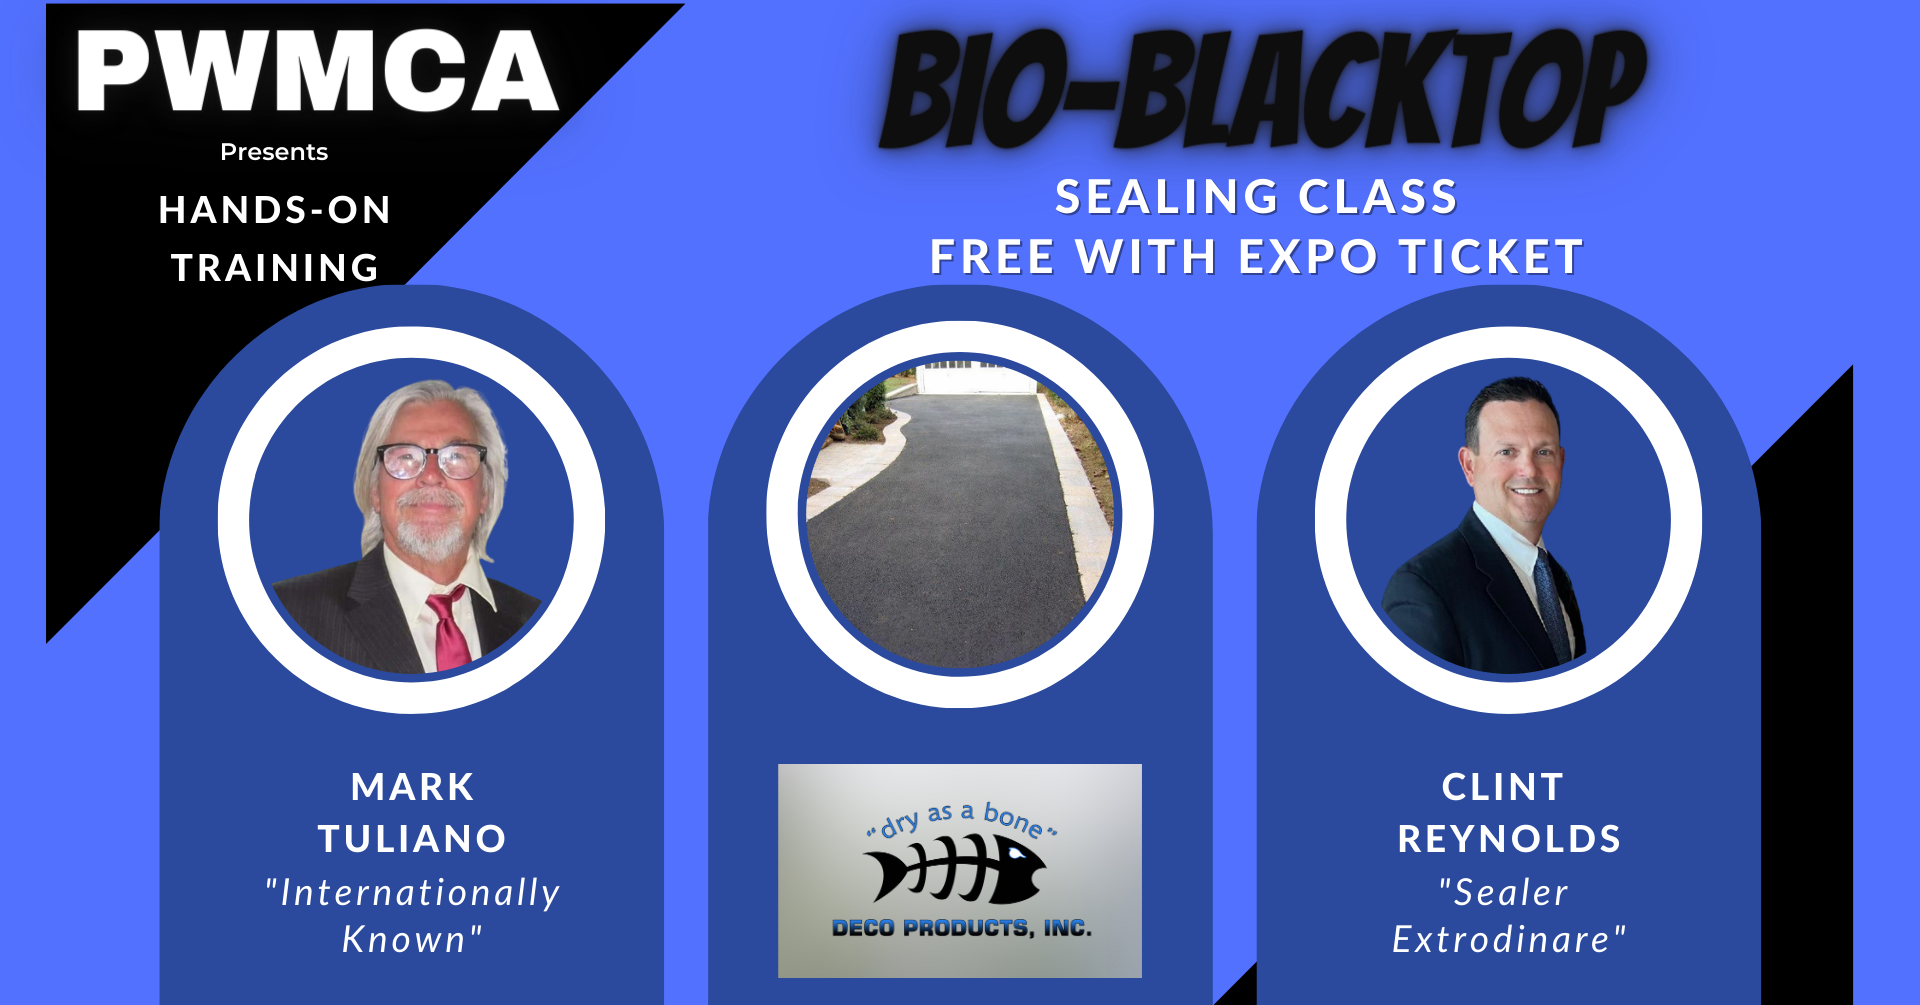 flyer promoting Bio-blacktop product with free expo ticket